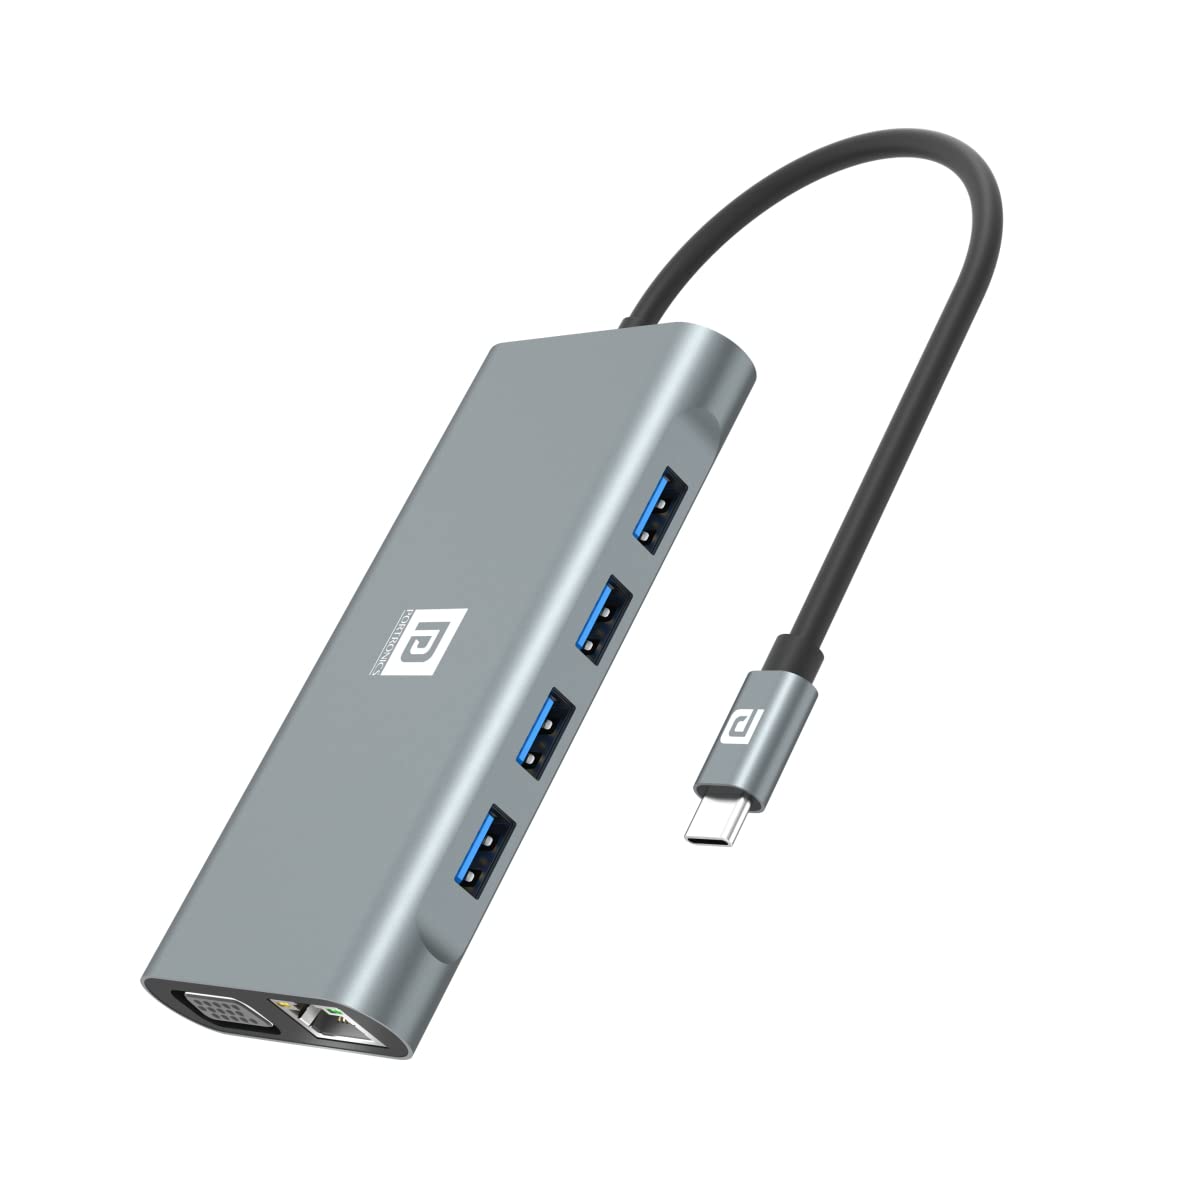 PORTRONICS MPORT 11C USB Hub with 10Gbps Data Transfer, 100W Max Output, and 3.5mm Audio Jack